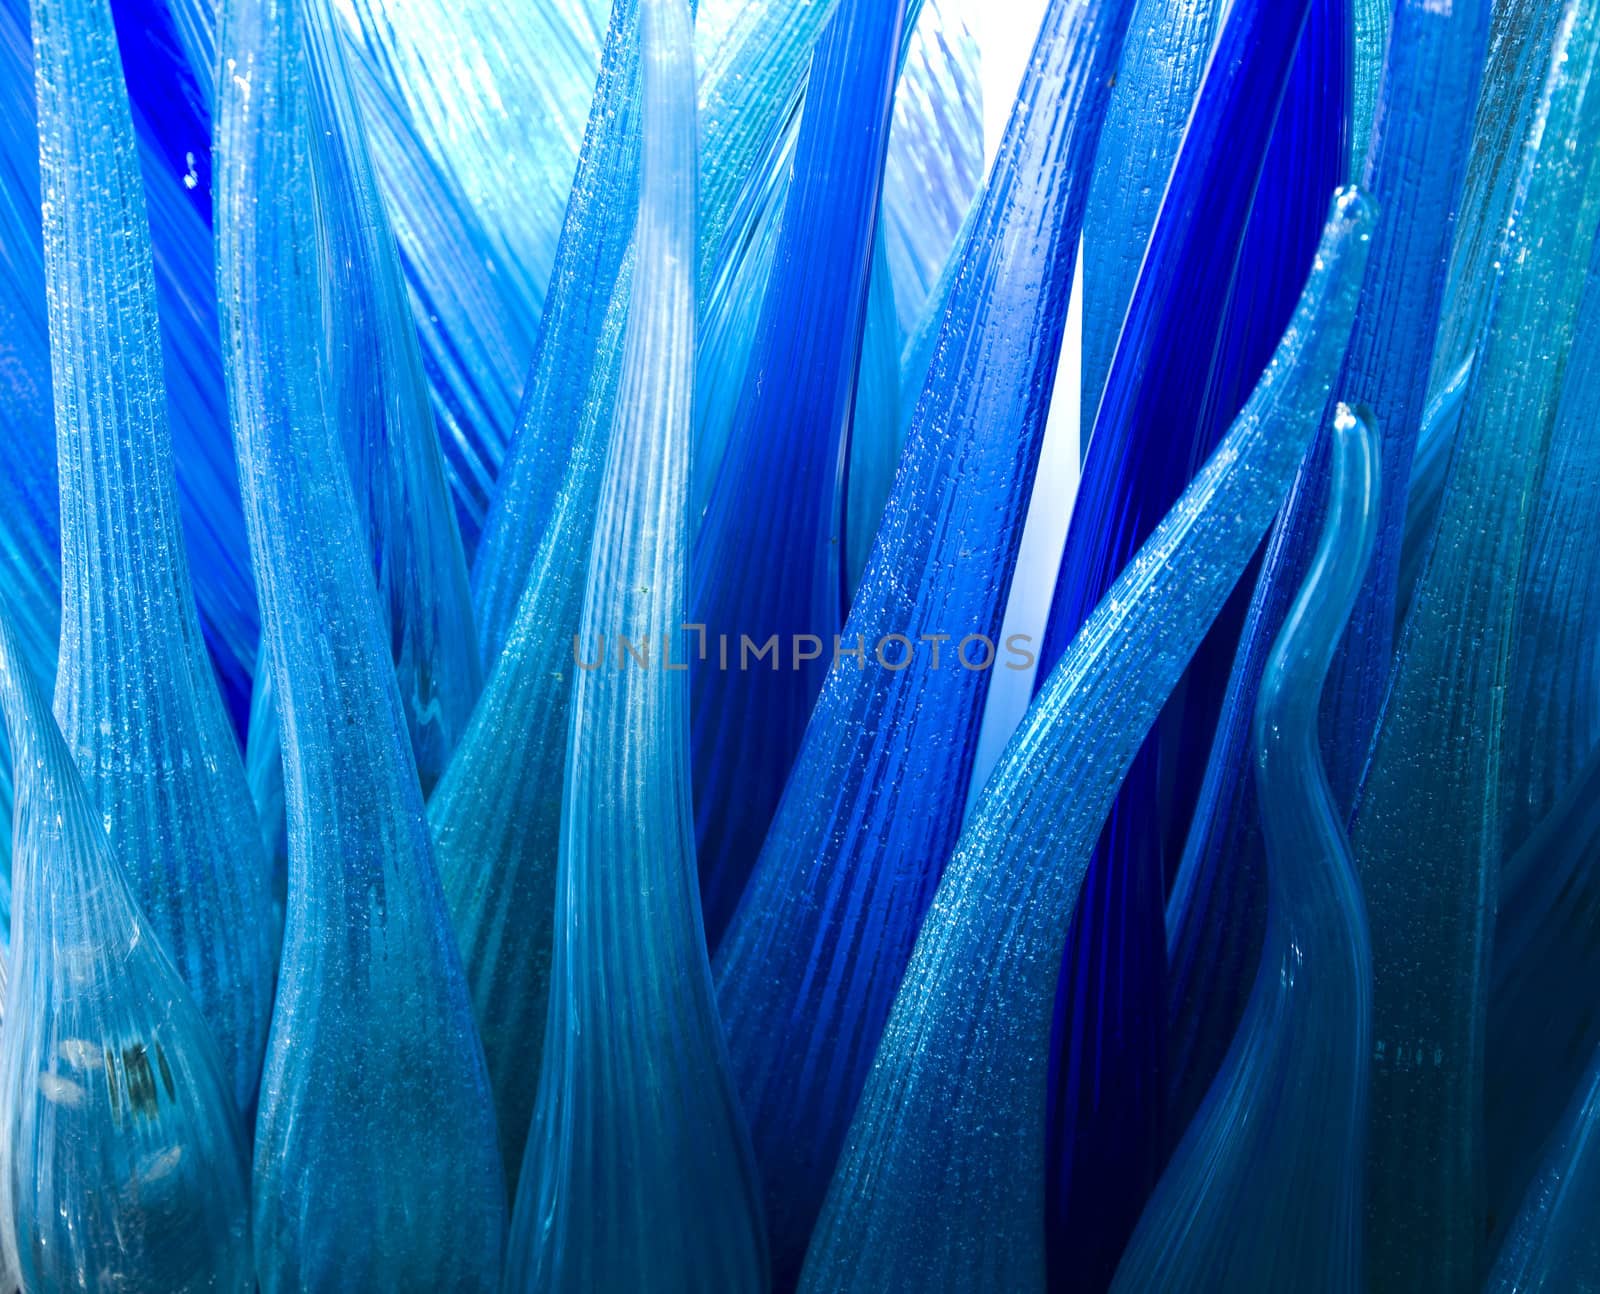 Abstract background - blue wave  by jelen80